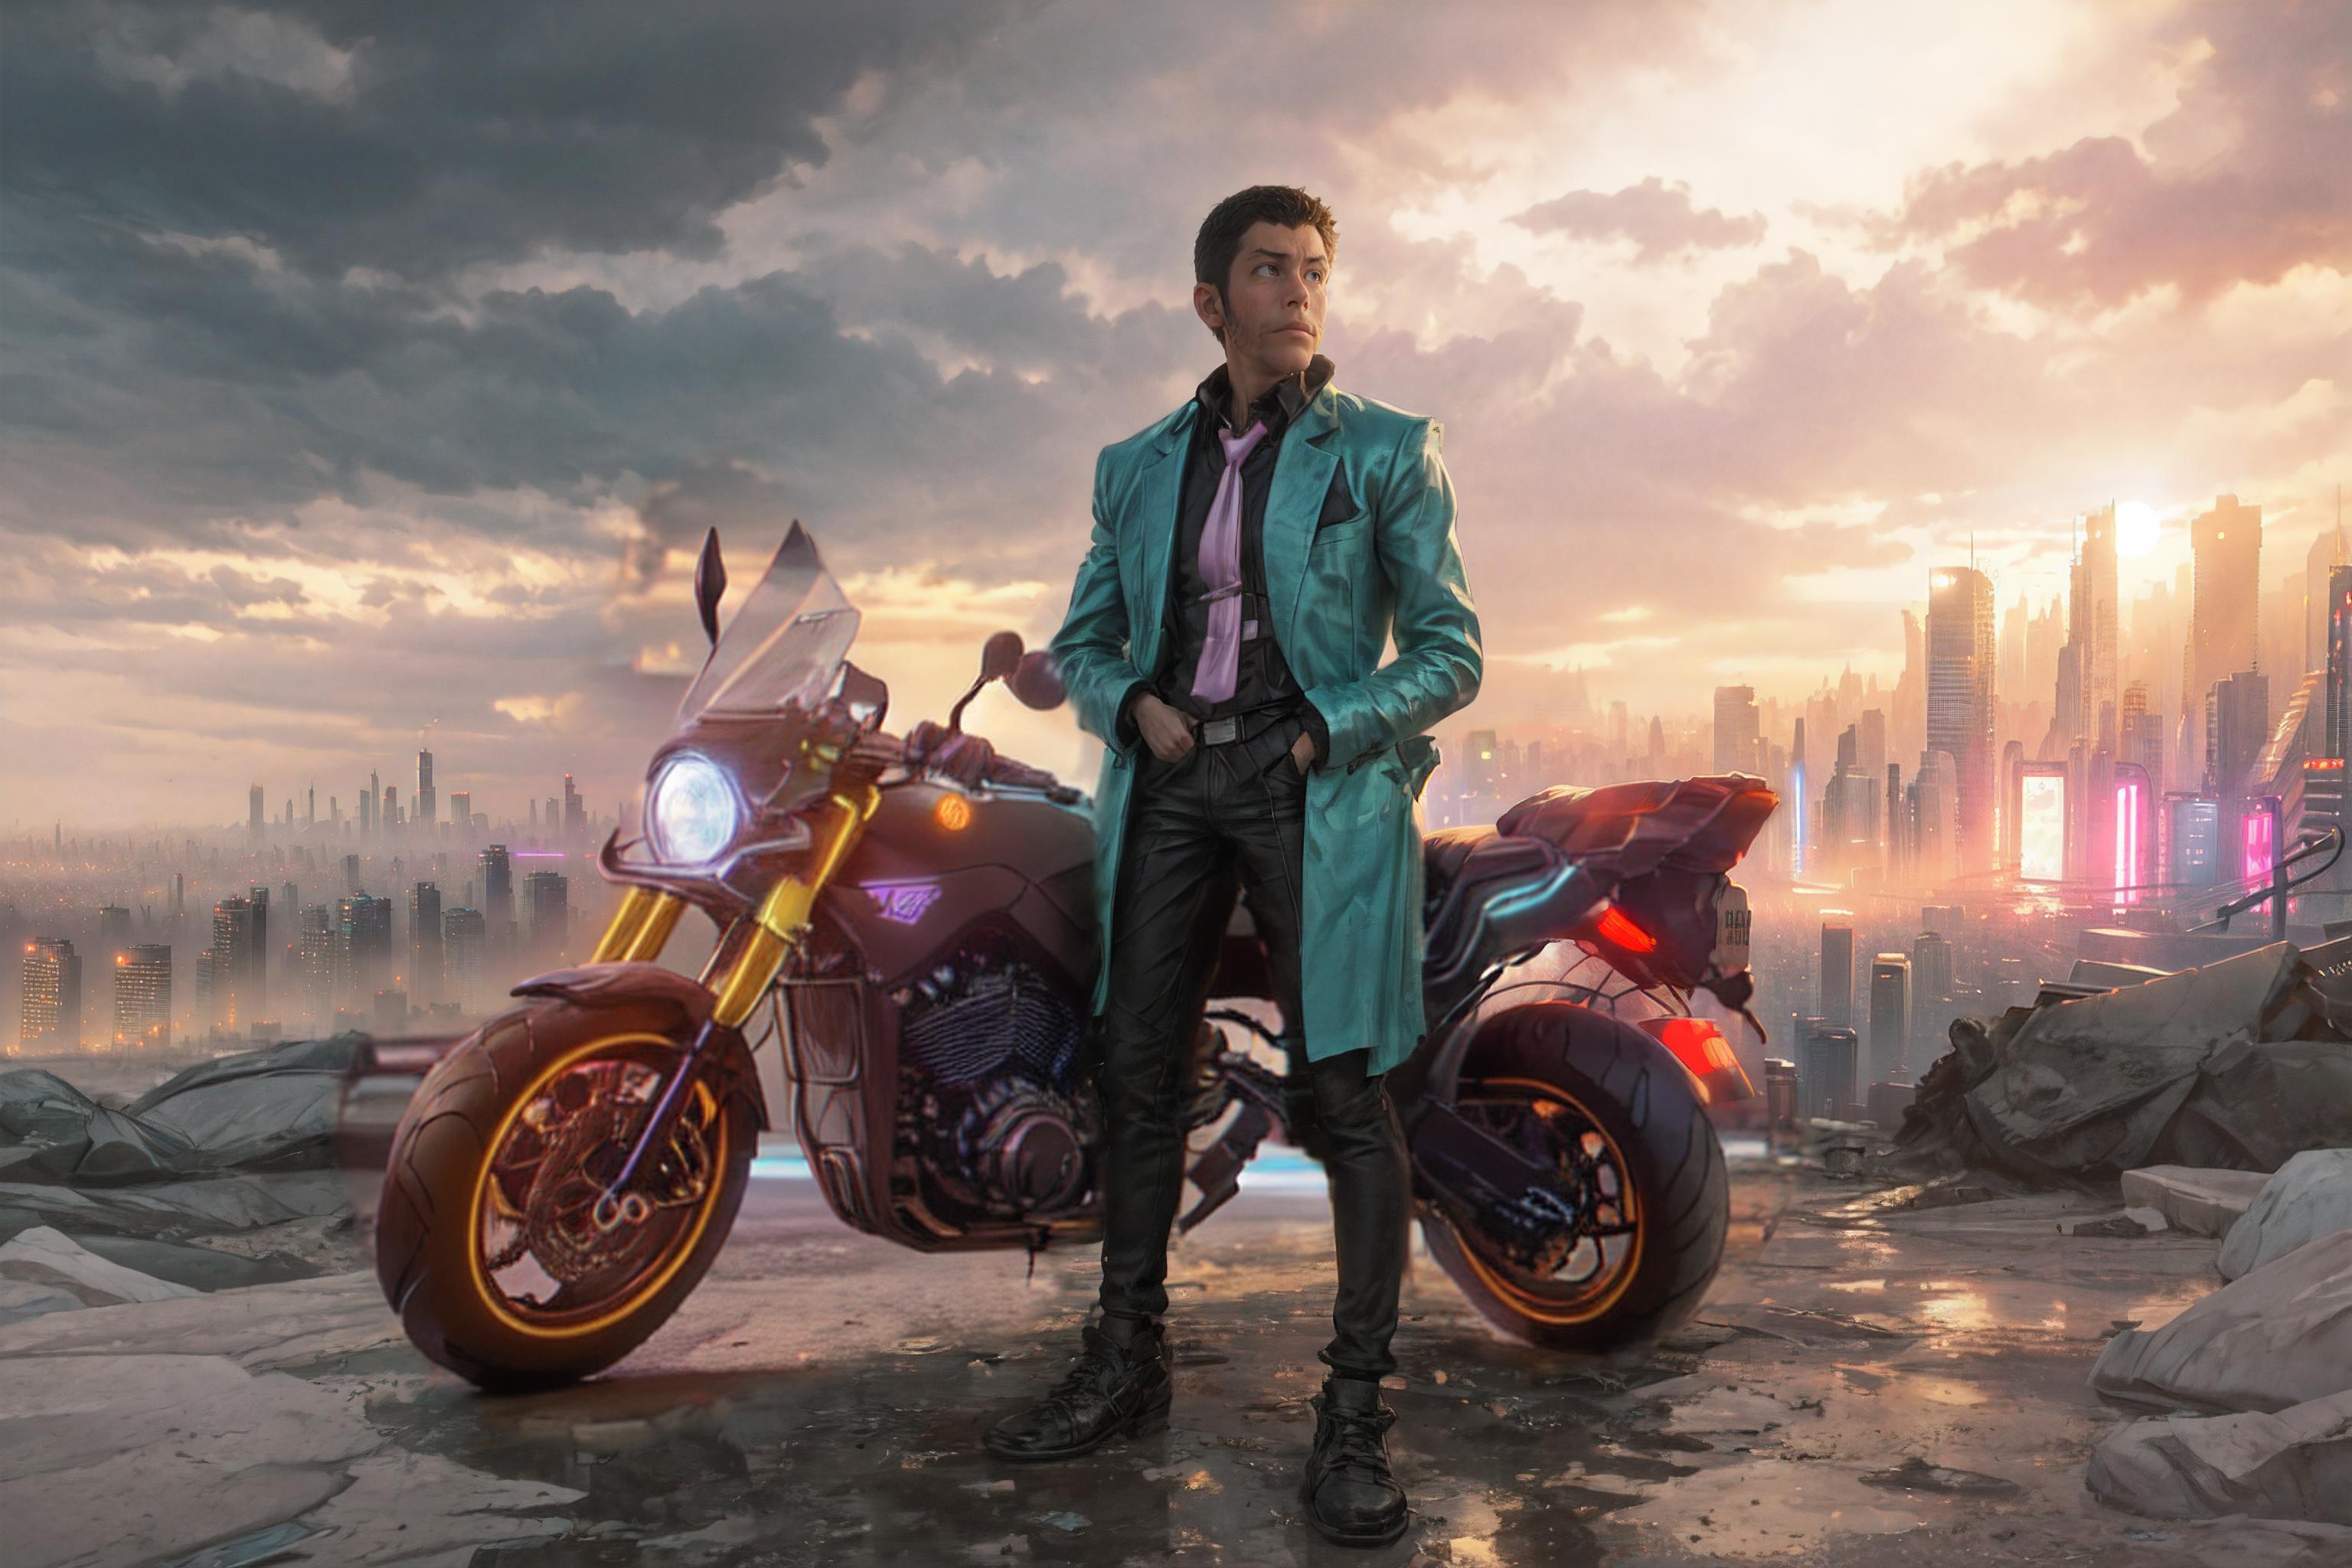 Lupin the Third - Lupin III image by Zerixworld